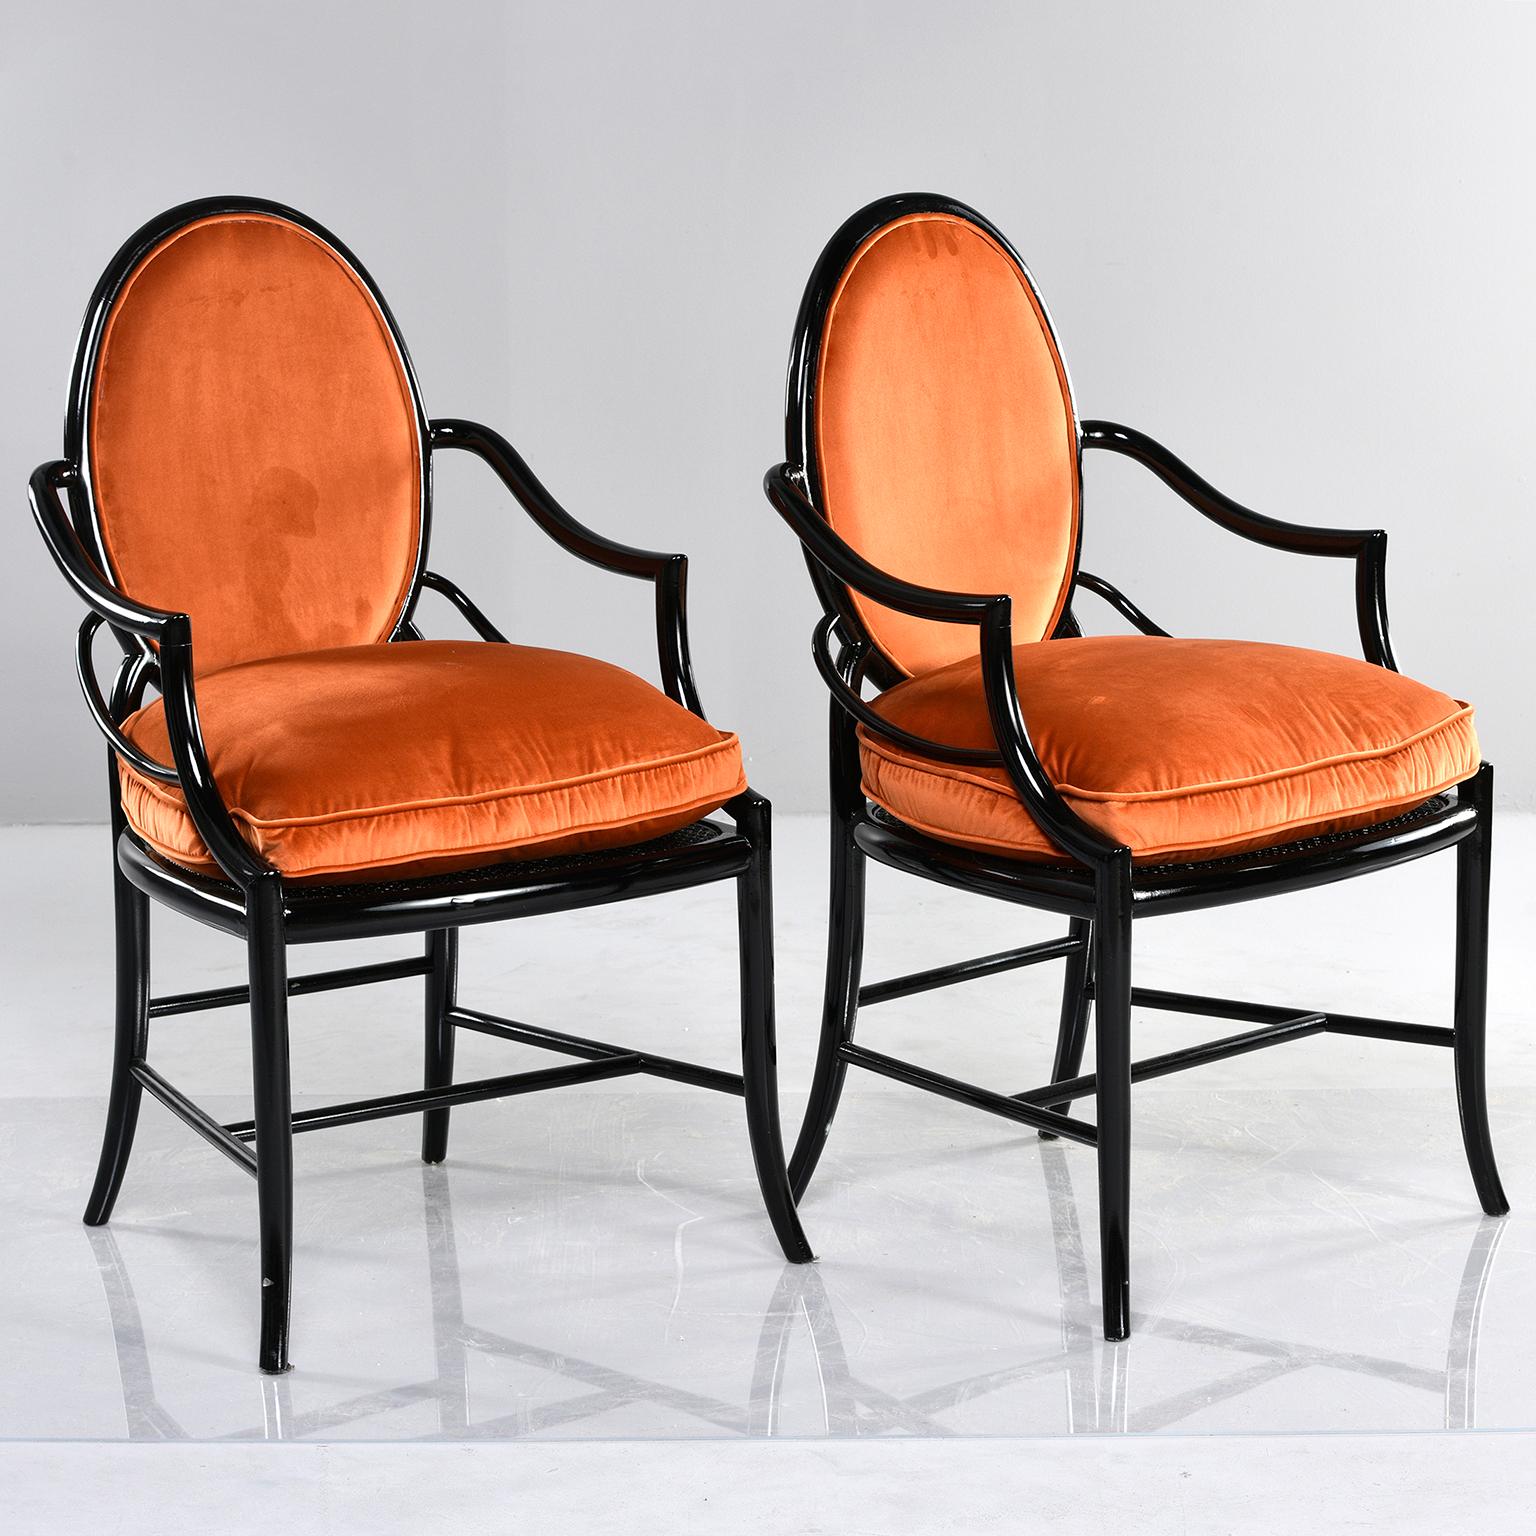 Pair of bentwood armchairs with ebonised finish and caned seats, circa 1950s. Newly upholstered in a pumpkin orange velvet chenille with removable seat cushions. Unknown maker. Found in Italy.

Measures: Arm height 27.5”, seat height 23.5”
Seat